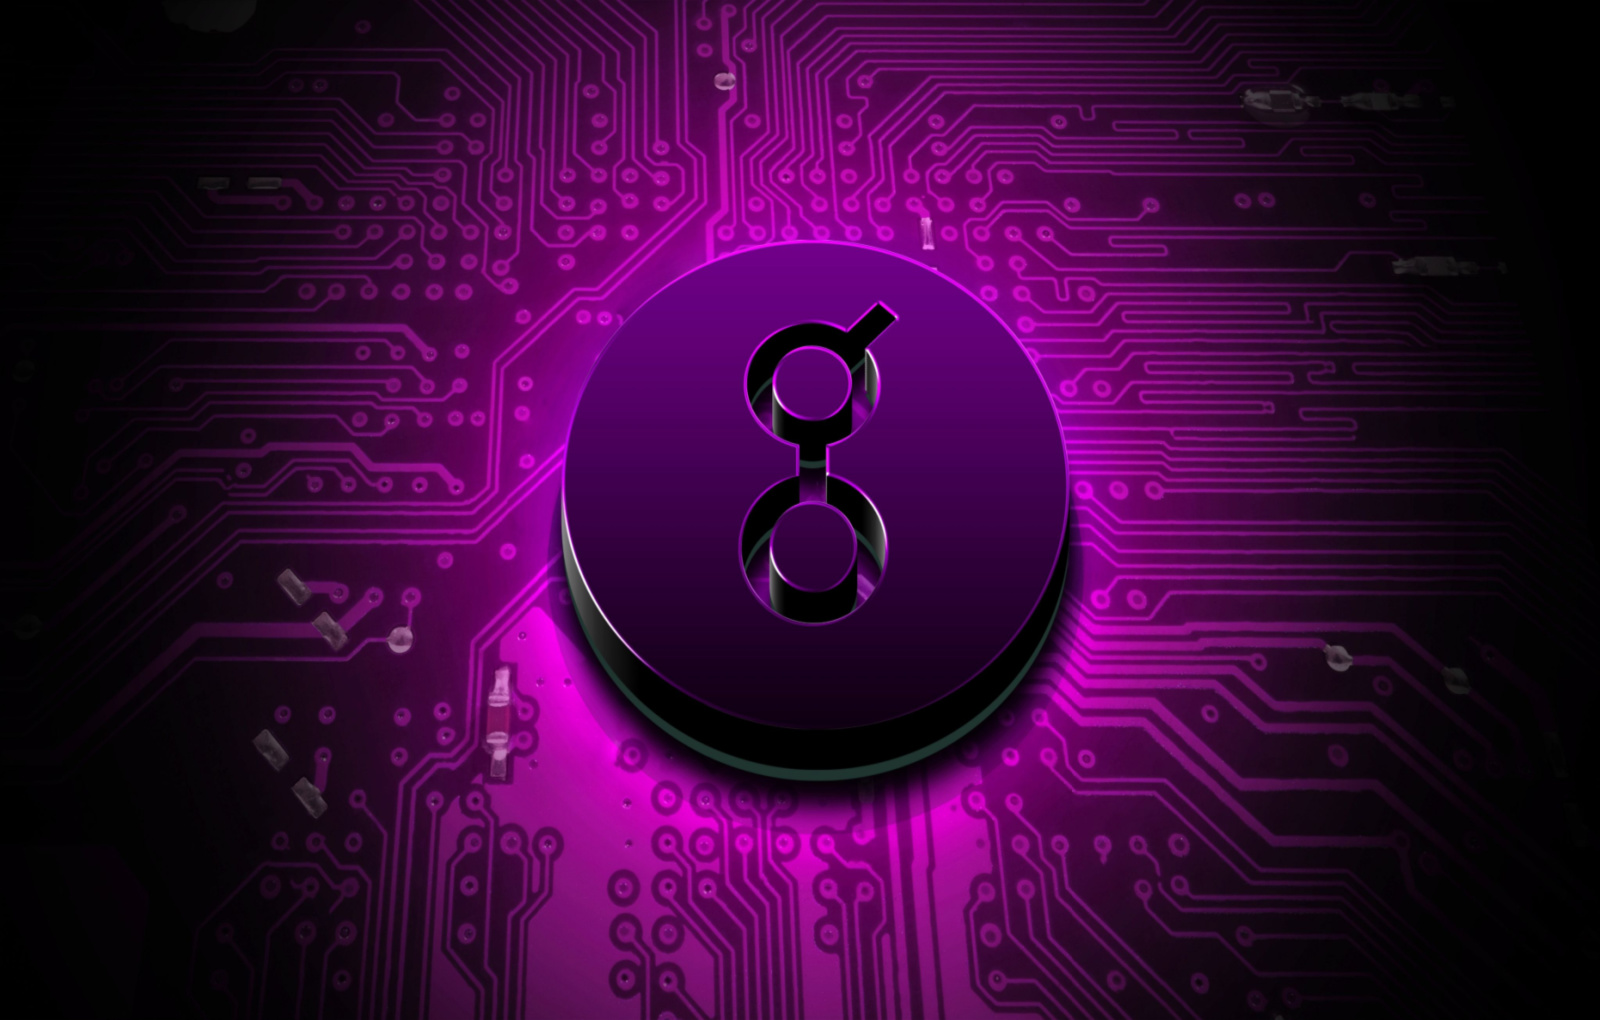 The Golem (GLM) crypto on a purple background representing Golem Price Predictions.